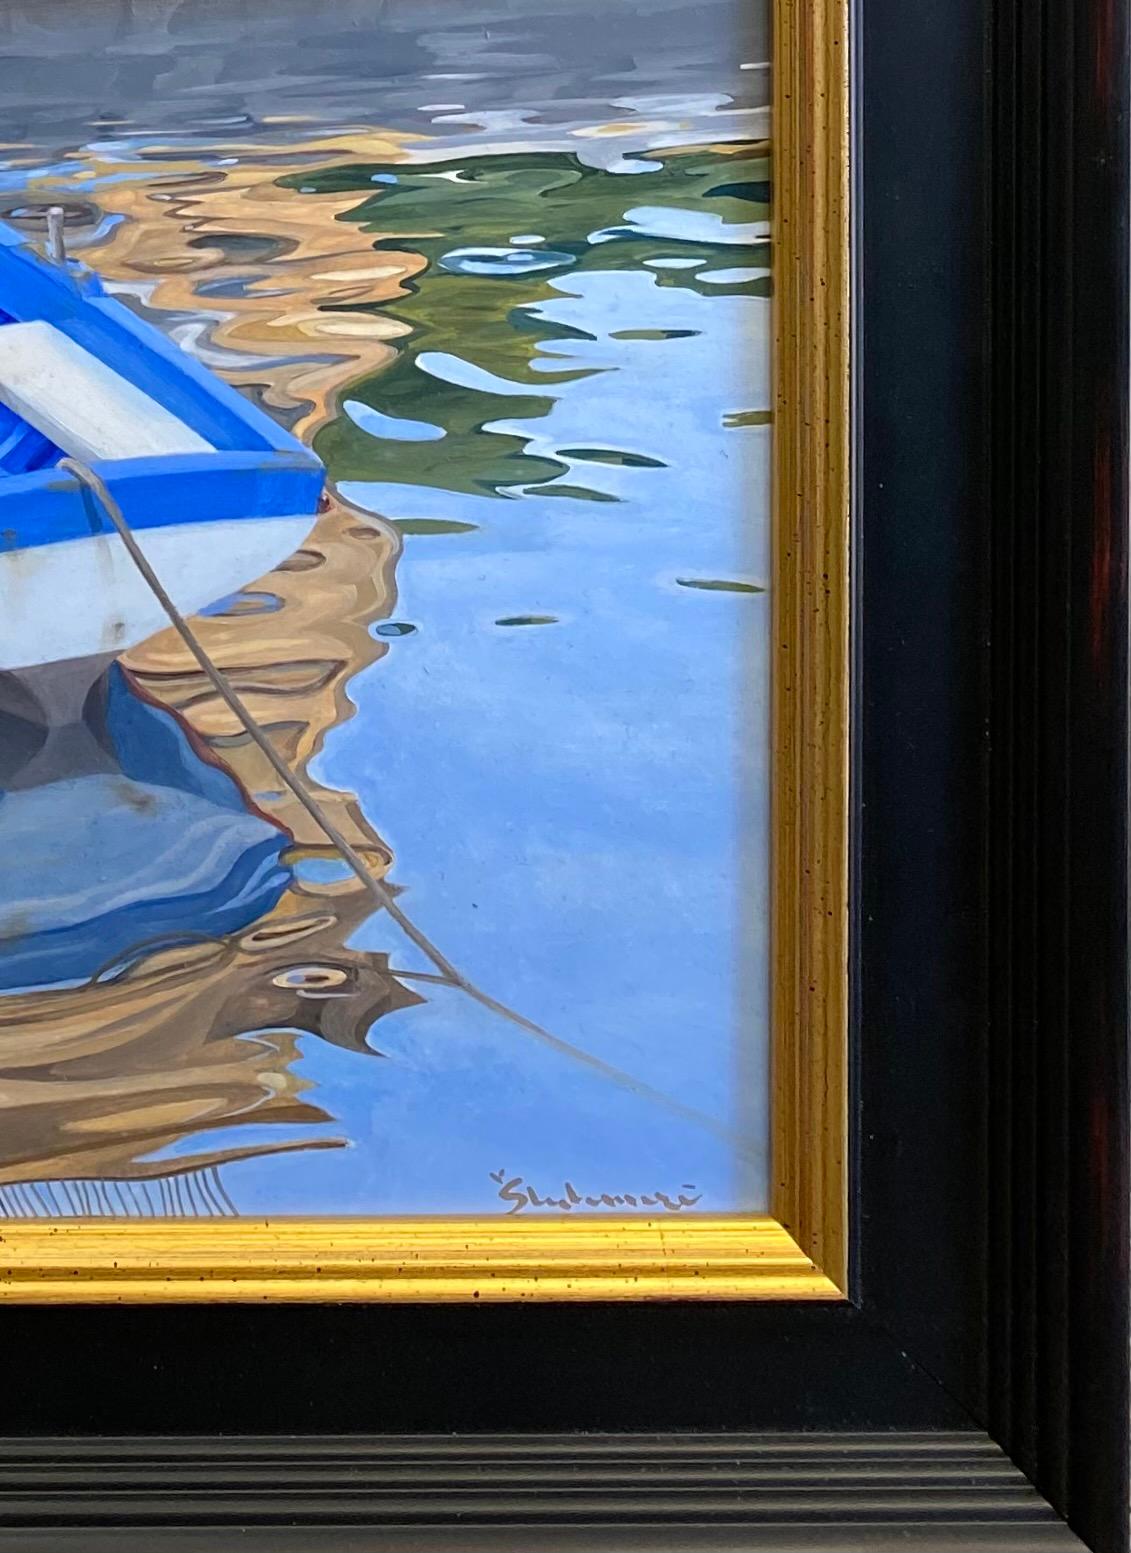 The abstract reflections in this original marine landscape are fantastical!  The ripples and waves are both fanciful and fantastic interpretations of the motion of water in the deep  Adriatic Sea marina when the sunlight casts it's glance!  After